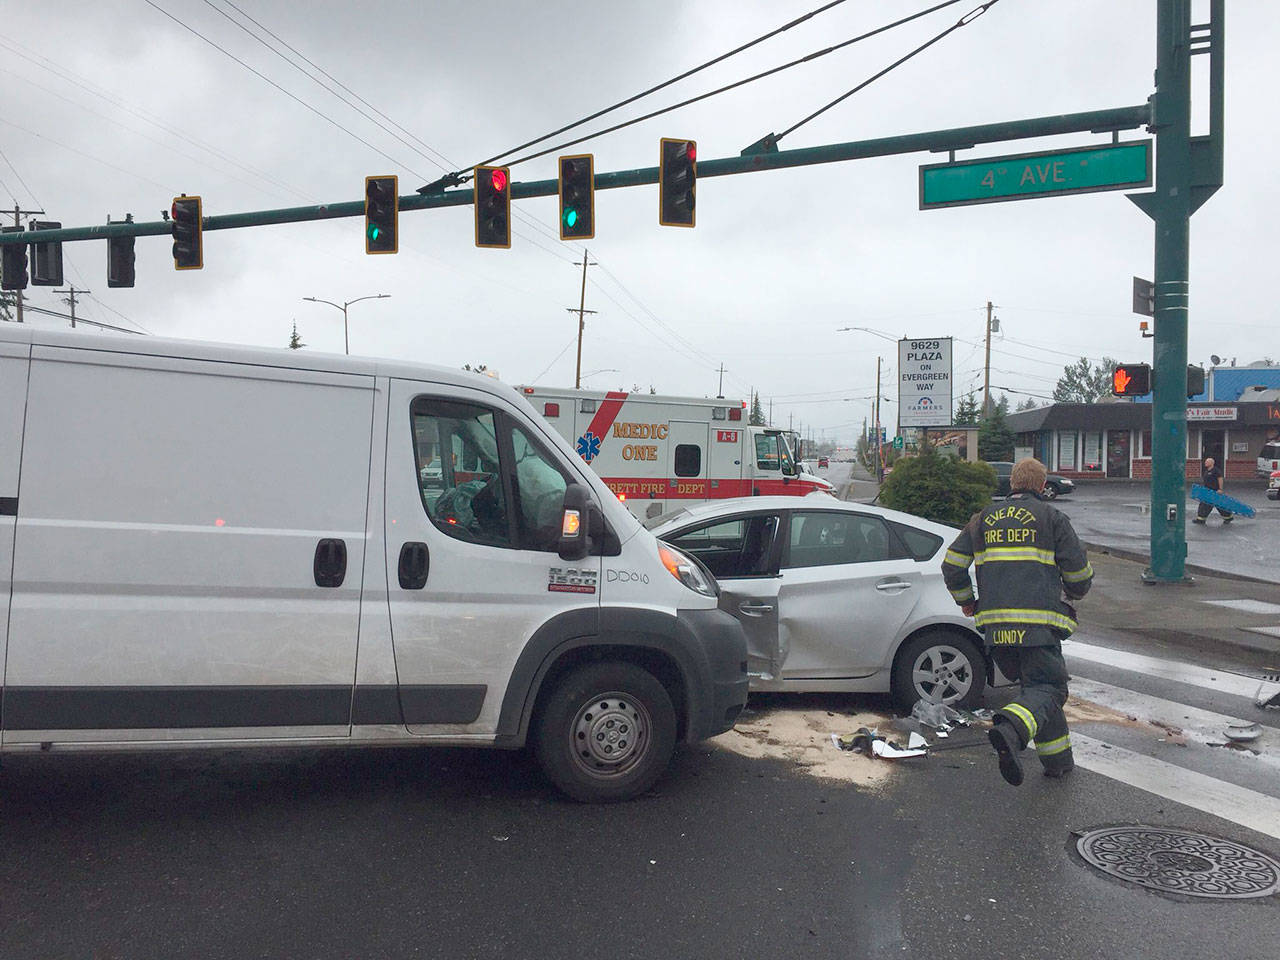 A crash at the intersection of 4th Avenue W and Evergreen Way sent one driver to the hospital and blocked traffic Thursday morning. (Everett Police Department photo)